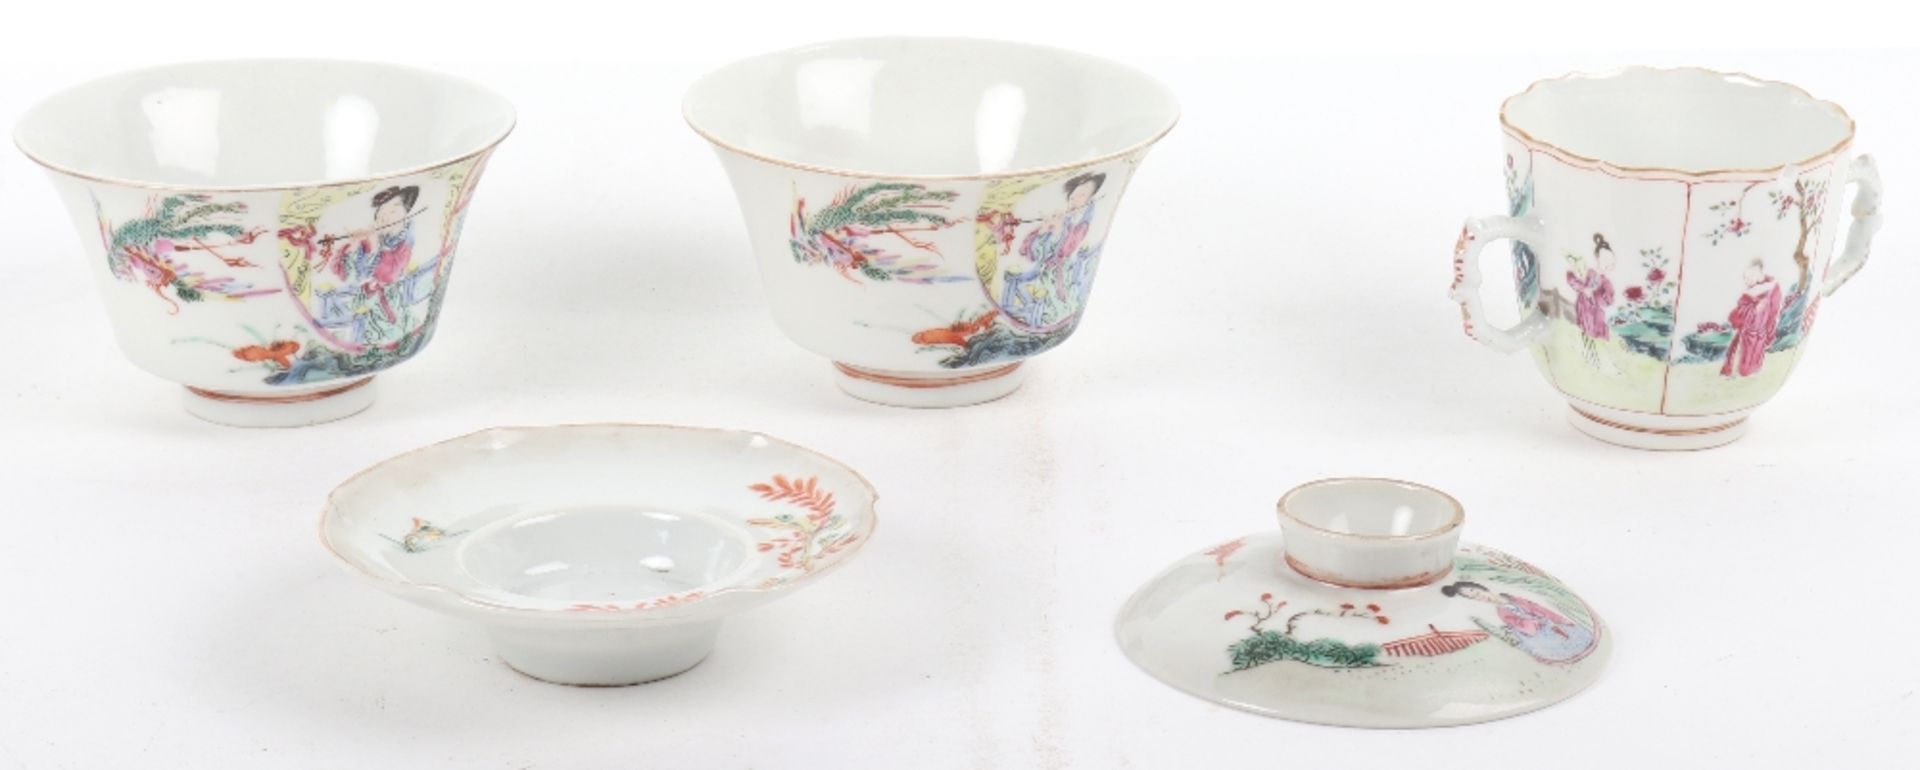 A pair of late 19th century Chinese famille rose porcelain bowls - Image 5 of 12